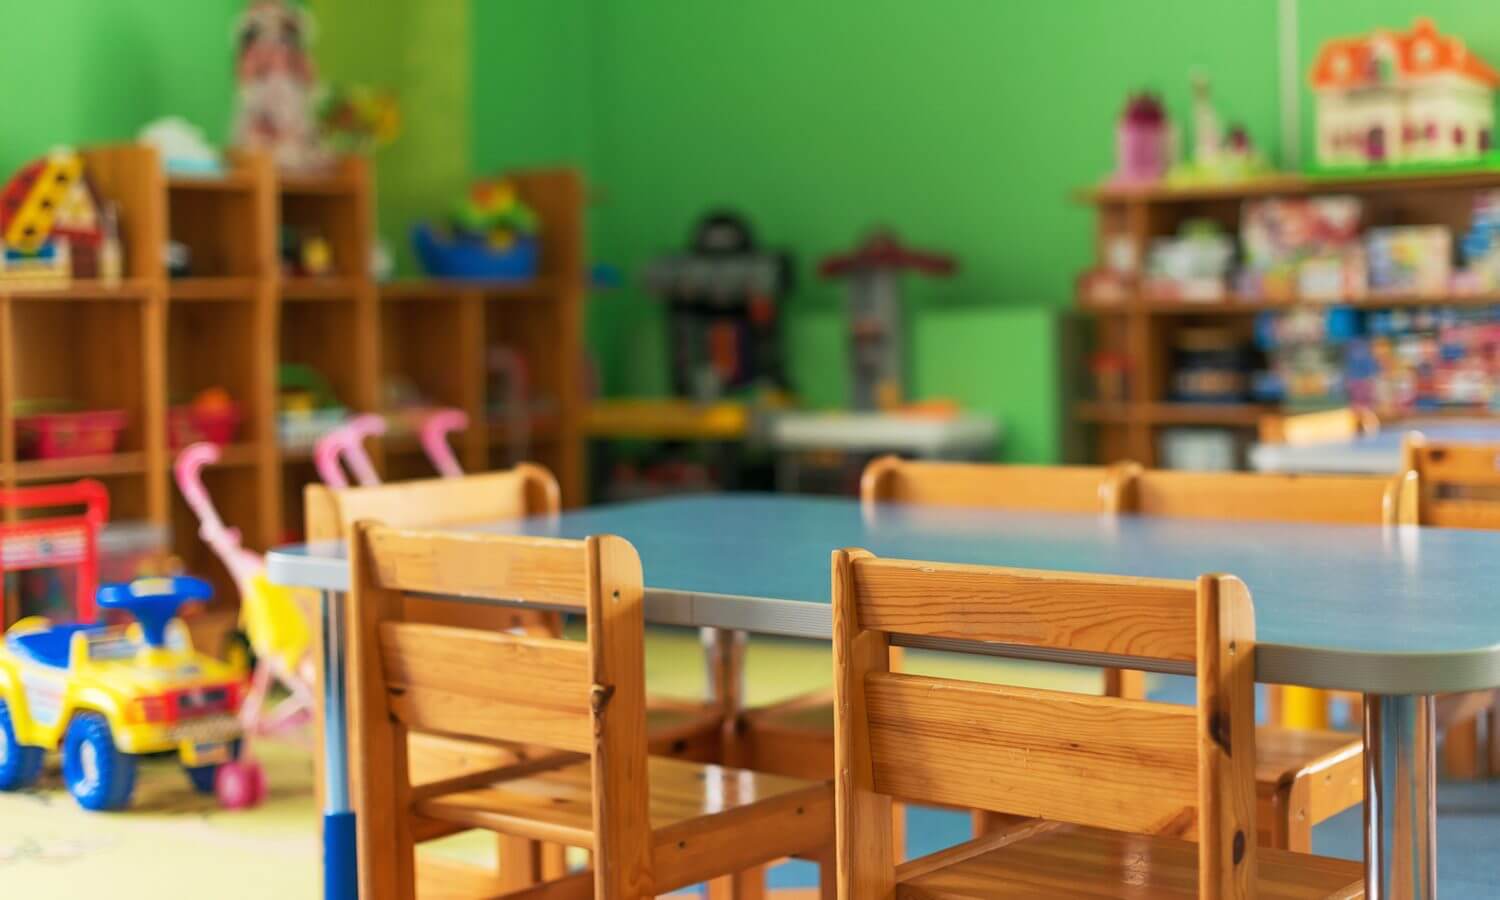 Let’s see some ideas to prepare your child to pre-school